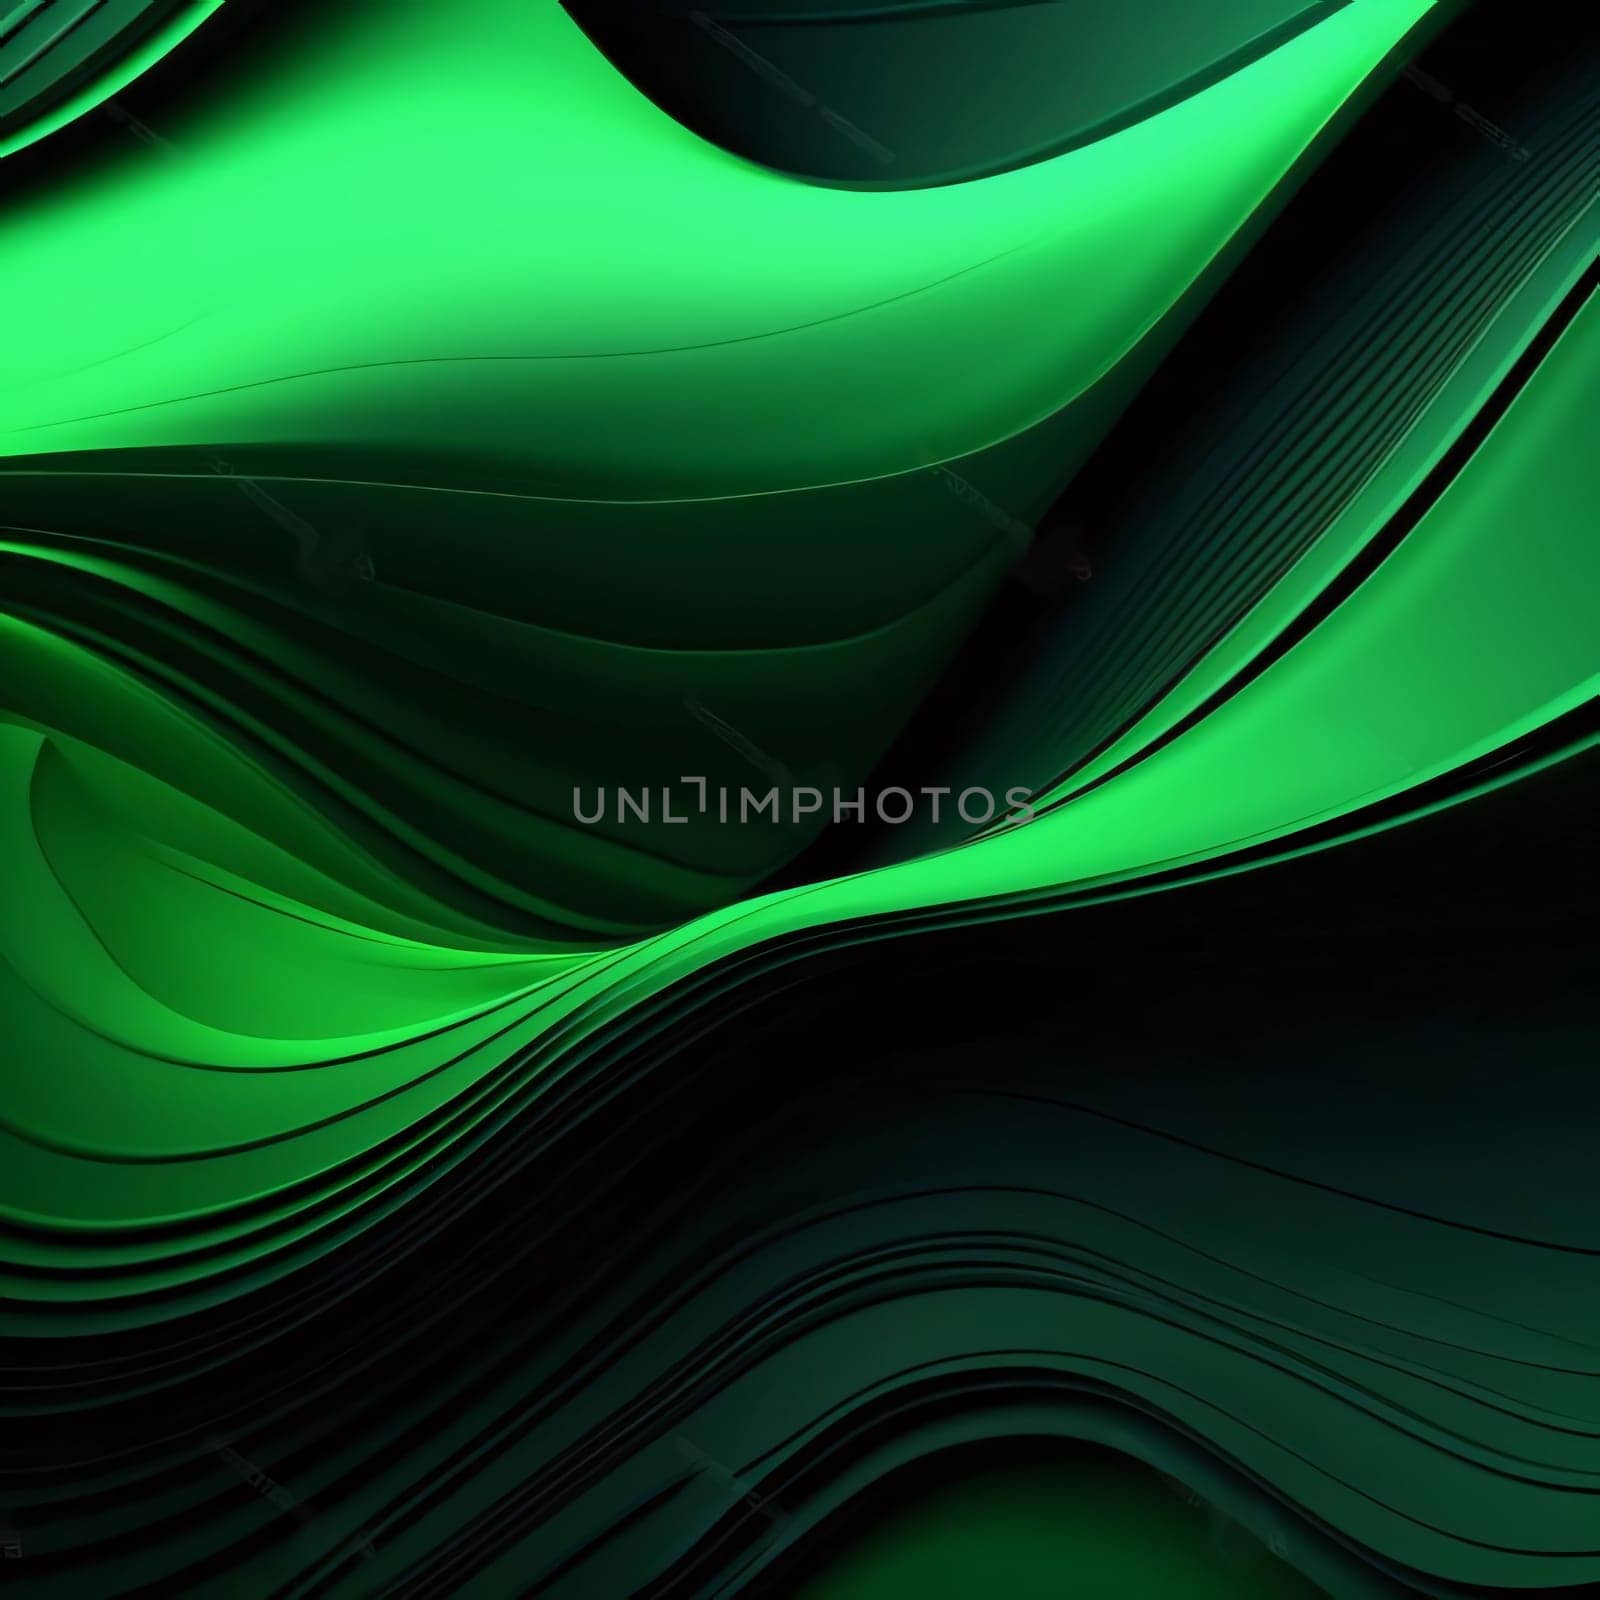 Abstract background design: abstract green background with smooth lines and waves, 3d render